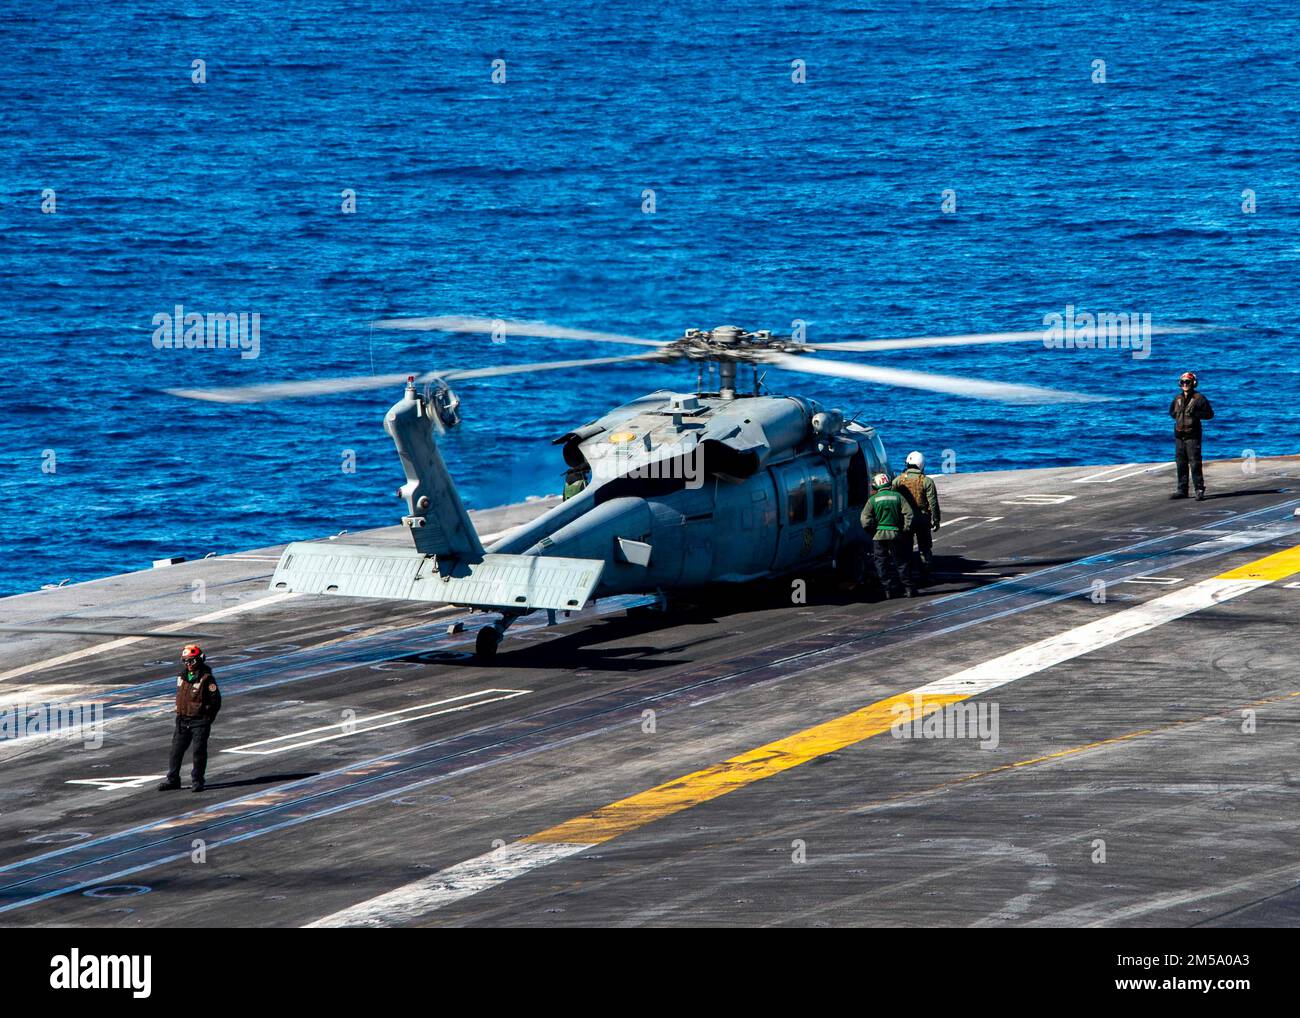 220213-N-MD461-1037 PACIFIC OCEAN (Feb. 13, 2022) An MH-60S Sea Hawk, assigned to the “Black Knights” of Helicopter Sea Combat Squadron (HSC) 4, prepares to take off from the flight deck of Nimitz-class aircraft carrier USS Carl Vinson (CVN 70), Feb. 13, 2022. Vinson is currently conducting routine maritime operations in U.S. 3rd Fleet. Stock Photo